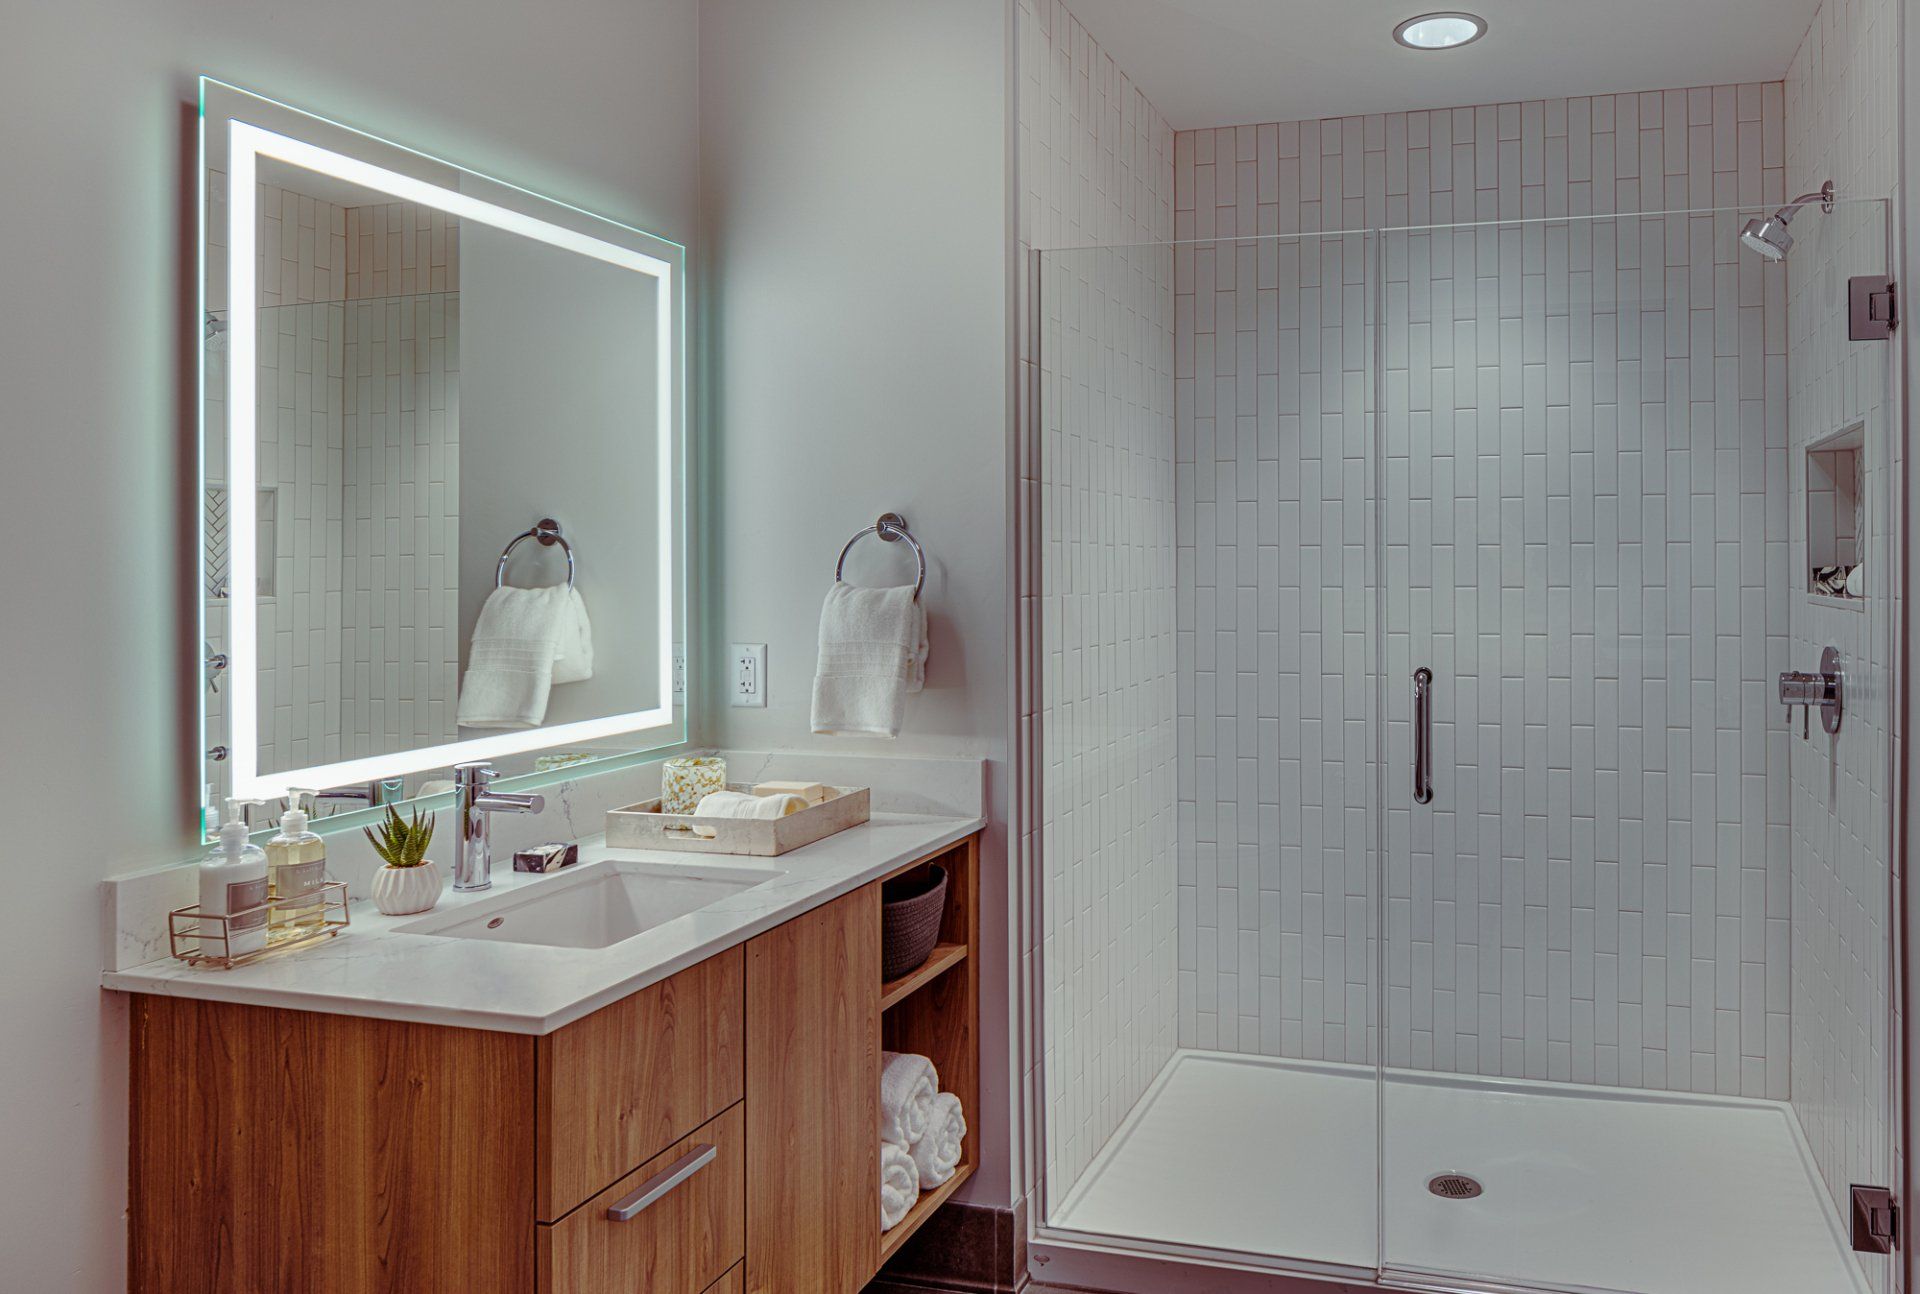 Luxury bathroom with glass shower door, mirror with light, and bathroom sink with cabinets at Gild Apartment.